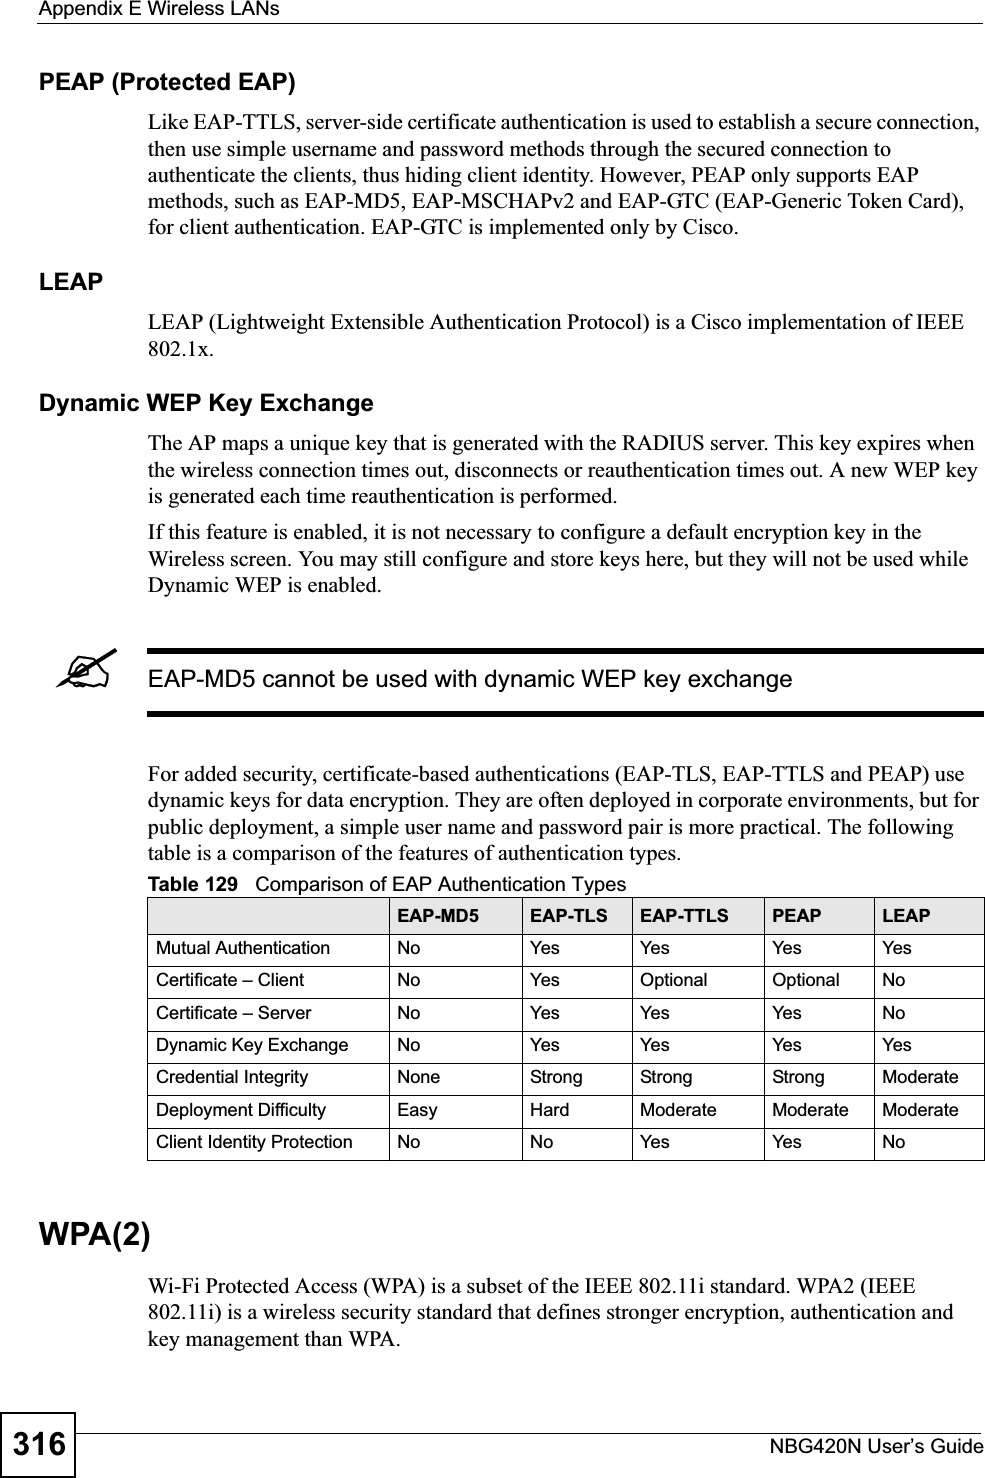 Appendix E Wireless LANsNBG420N User’s Guide316PEAP (Protected EAP)Like EAP-TTLS, server-side certificate authentication is used to establish a secure connection, then use simple username and password methods through the secured connection to authenticate the clients, thus hiding client identity. However, PEAP only supports EAP methods, such as EAP-MD5, EAP-MSCHAPv2 and EAP-GTC (EAP-Generic Token Card), for client authentication. EAP-GTC is implemented only by Cisco.LEAPLEAP (Lightweight Extensible Authentication Protocol) is a Cisco implementation of IEEE 802.1x. Dynamic WEP Key ExchangeThe AP maps a unique key that is generated with the RADIUS server. This key expires when the wireless connection times out, disconnects or reauthentication times out. A new WEP key is generated each time reauthentication is performed.If this feature is enabled, it is not necessary to configure a default encryption key in the Wireless screen. You may still configure and store keys here, but they will not be used while Dynamic WEP is enabled.&quot;EAP-MD5 cannot be used with dynamic WEP key exchangeFor added security, certificate-based authentications (EAP-TLS, EAP-TTLS and PEAP) use dynamic keys for data encryption. They are often deployed in corporate environments, but for public deployment, a simple user name and password pair is more practical. The following table is a comparison of the features of authentication types.WPA(2)Wi-Fi Protected Access (WPA) is a subset of the IEEE 802.11i standard. WPA2 (IEEE 802.11i) is a wireless security standard that defines stronger encryption, authentication and key management than WPA. Table 129   Comparison of EAP Authentication TypesEAP-MD5 EAP-TLS EAP-TTLS PEAP LEAPMutual Authentication No Yes Yes Yes YesCertificate – Client No Yes Optional Optional NoCertificate – Server No Yes Yes Yes NoDynamic Key Exchange No Yes Yes Yes YesCredential Integrity None Strong Strong Strong ModerateDeployment Difficulty Easy Hard Moderate Moderate ModerateClient Identity Protection No No Yes Yes No